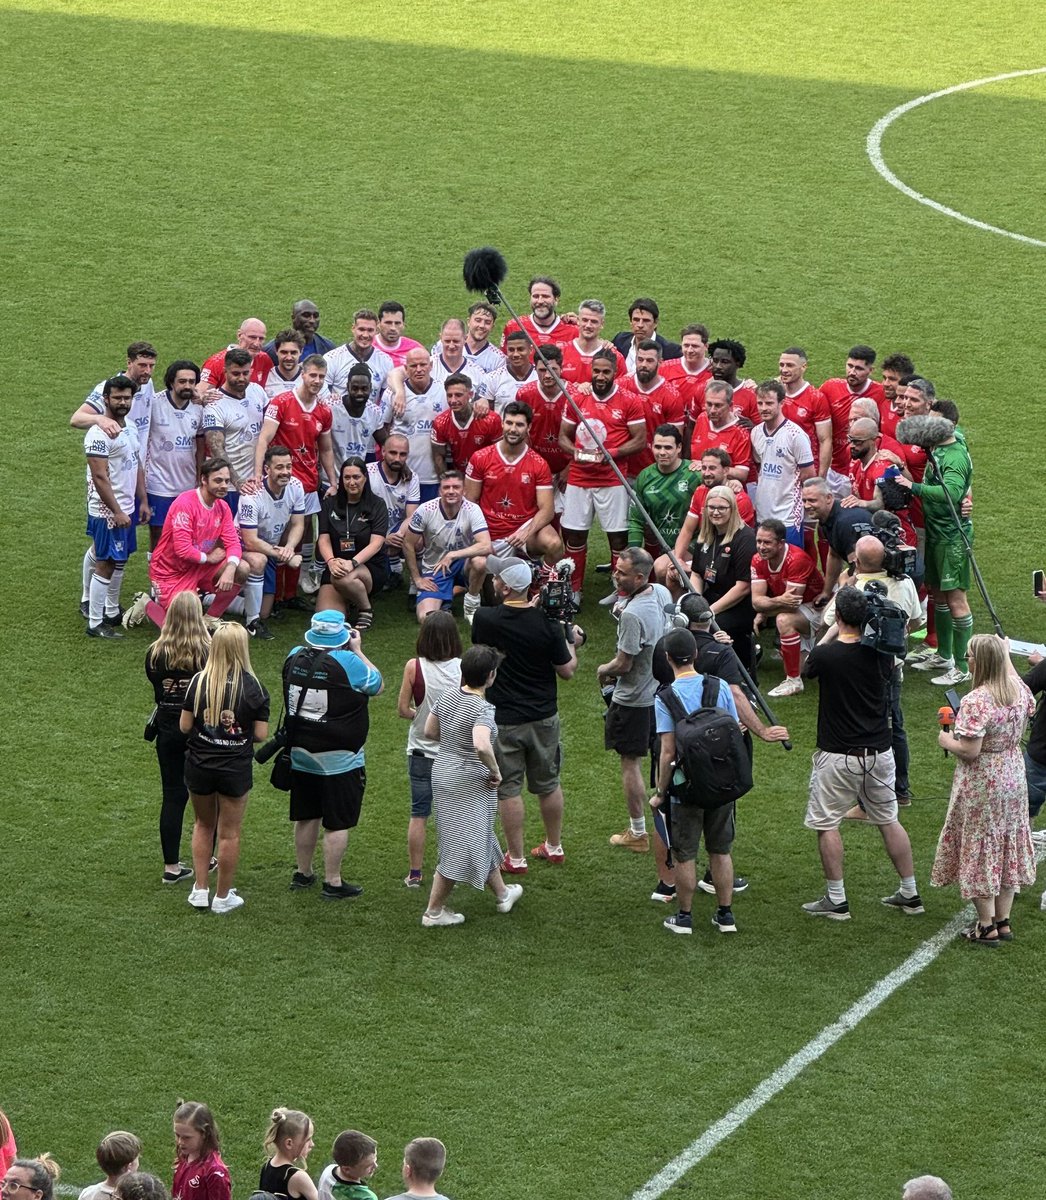 Such an incredible day yesterday raising awareness & support for @josephssmileuk What an honour to play for Cymru 🏴󠁧󠁢󠁷󠁬󠁳󠁿 alongside some of my sporting heroes. Please support @josephssmileuk & @Bradleysfight - two important charities that need all the support they can get.